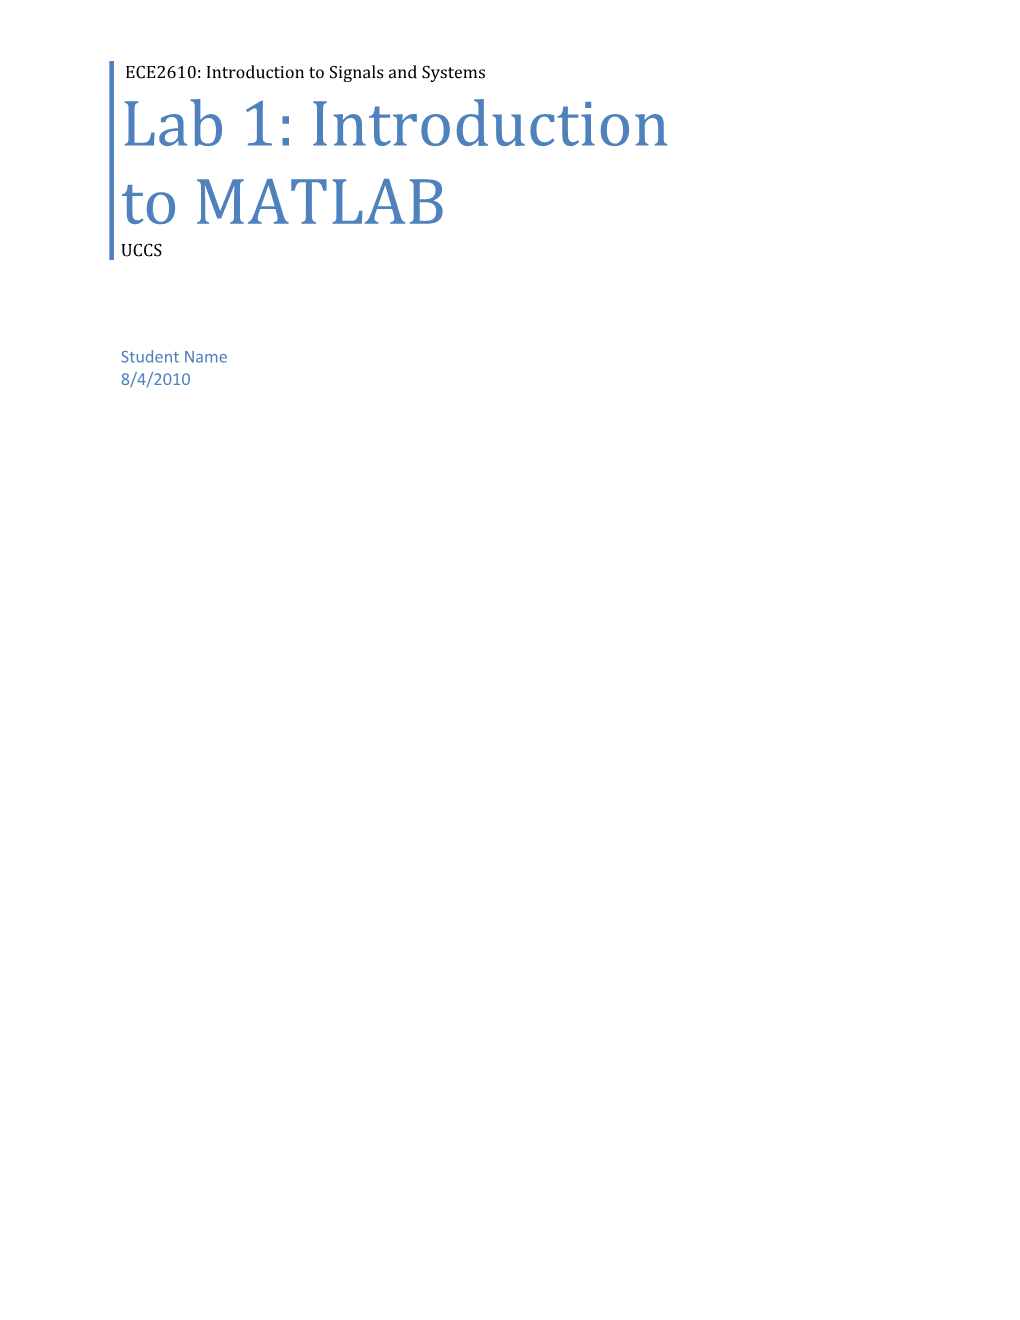 Lab 1: Introduction to MATLAB